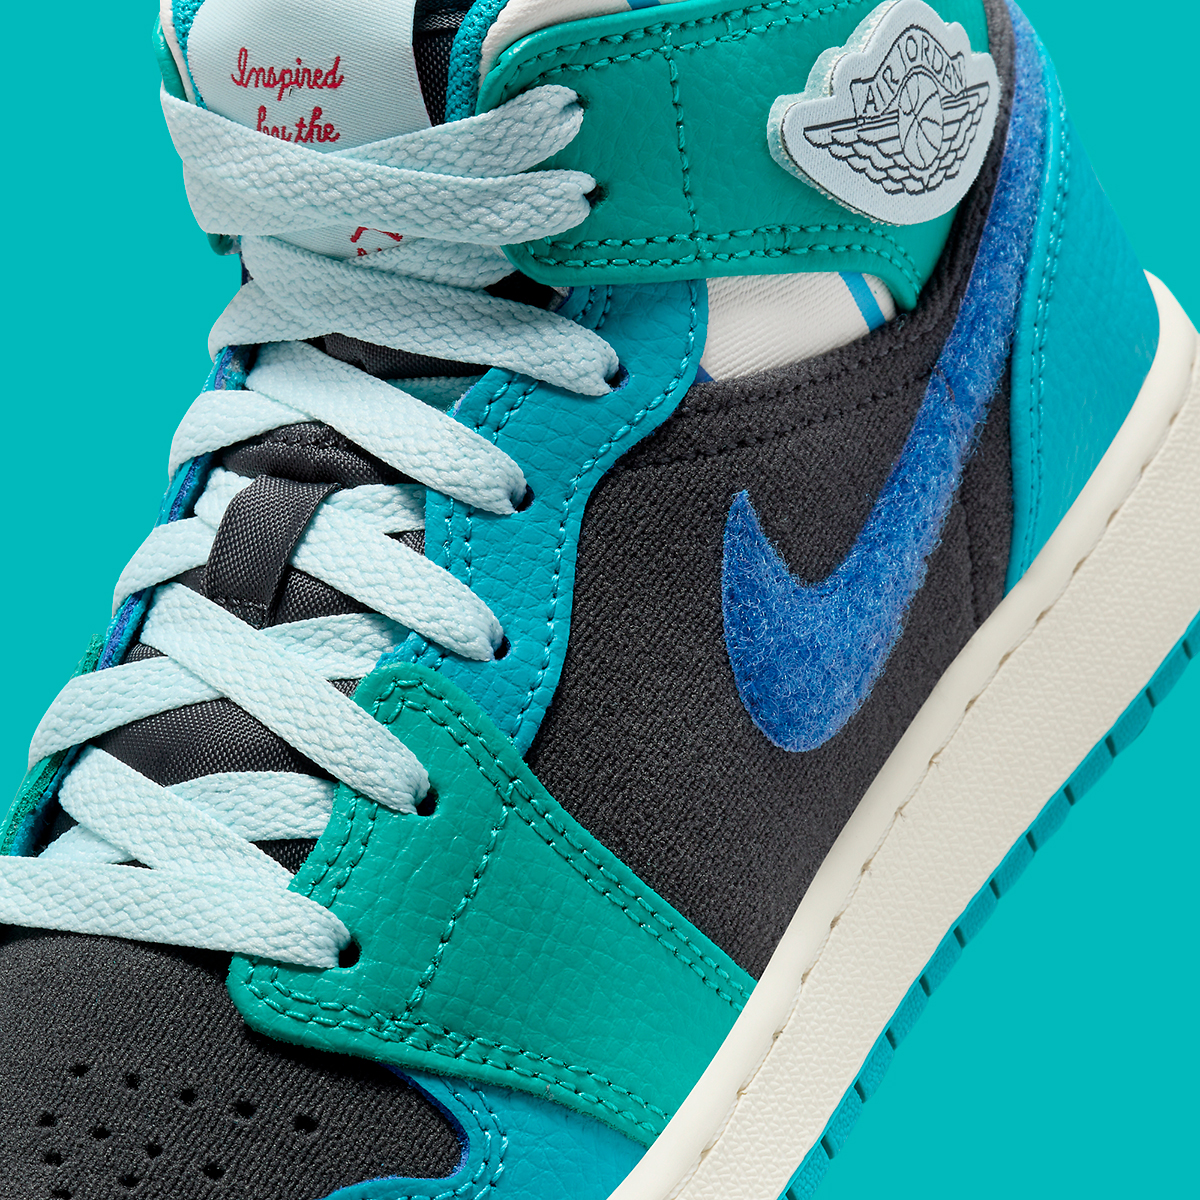 Jordan 1 Mid Ice Blue Sail Gs Inspired By The Greatest Fj9482 004 2